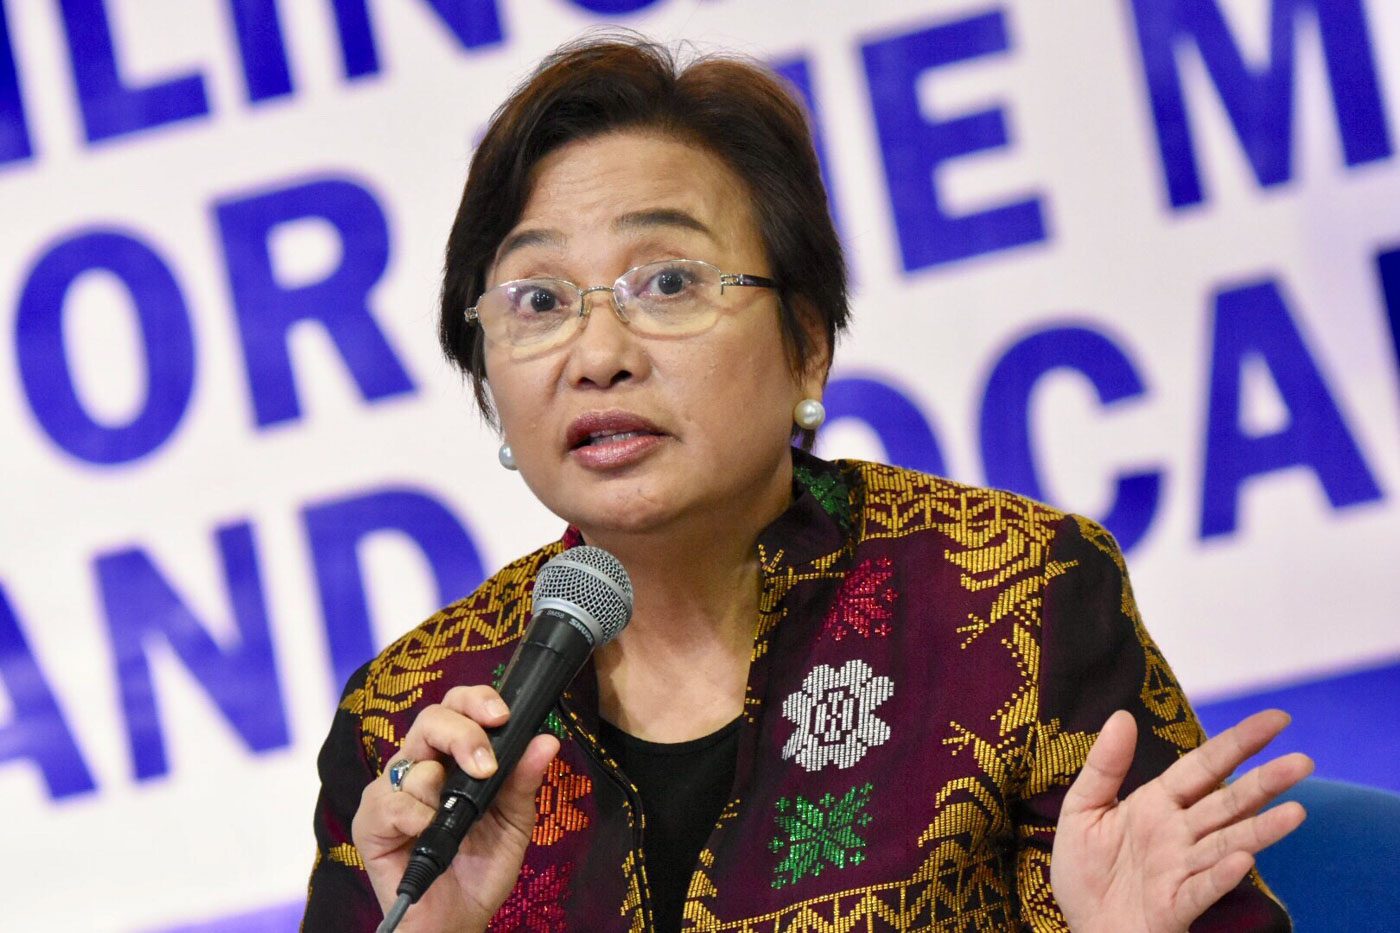 FULL TEXT: Separate opinion of Comelec’s Rowena Guanzon on cases vs Marcos Jr.